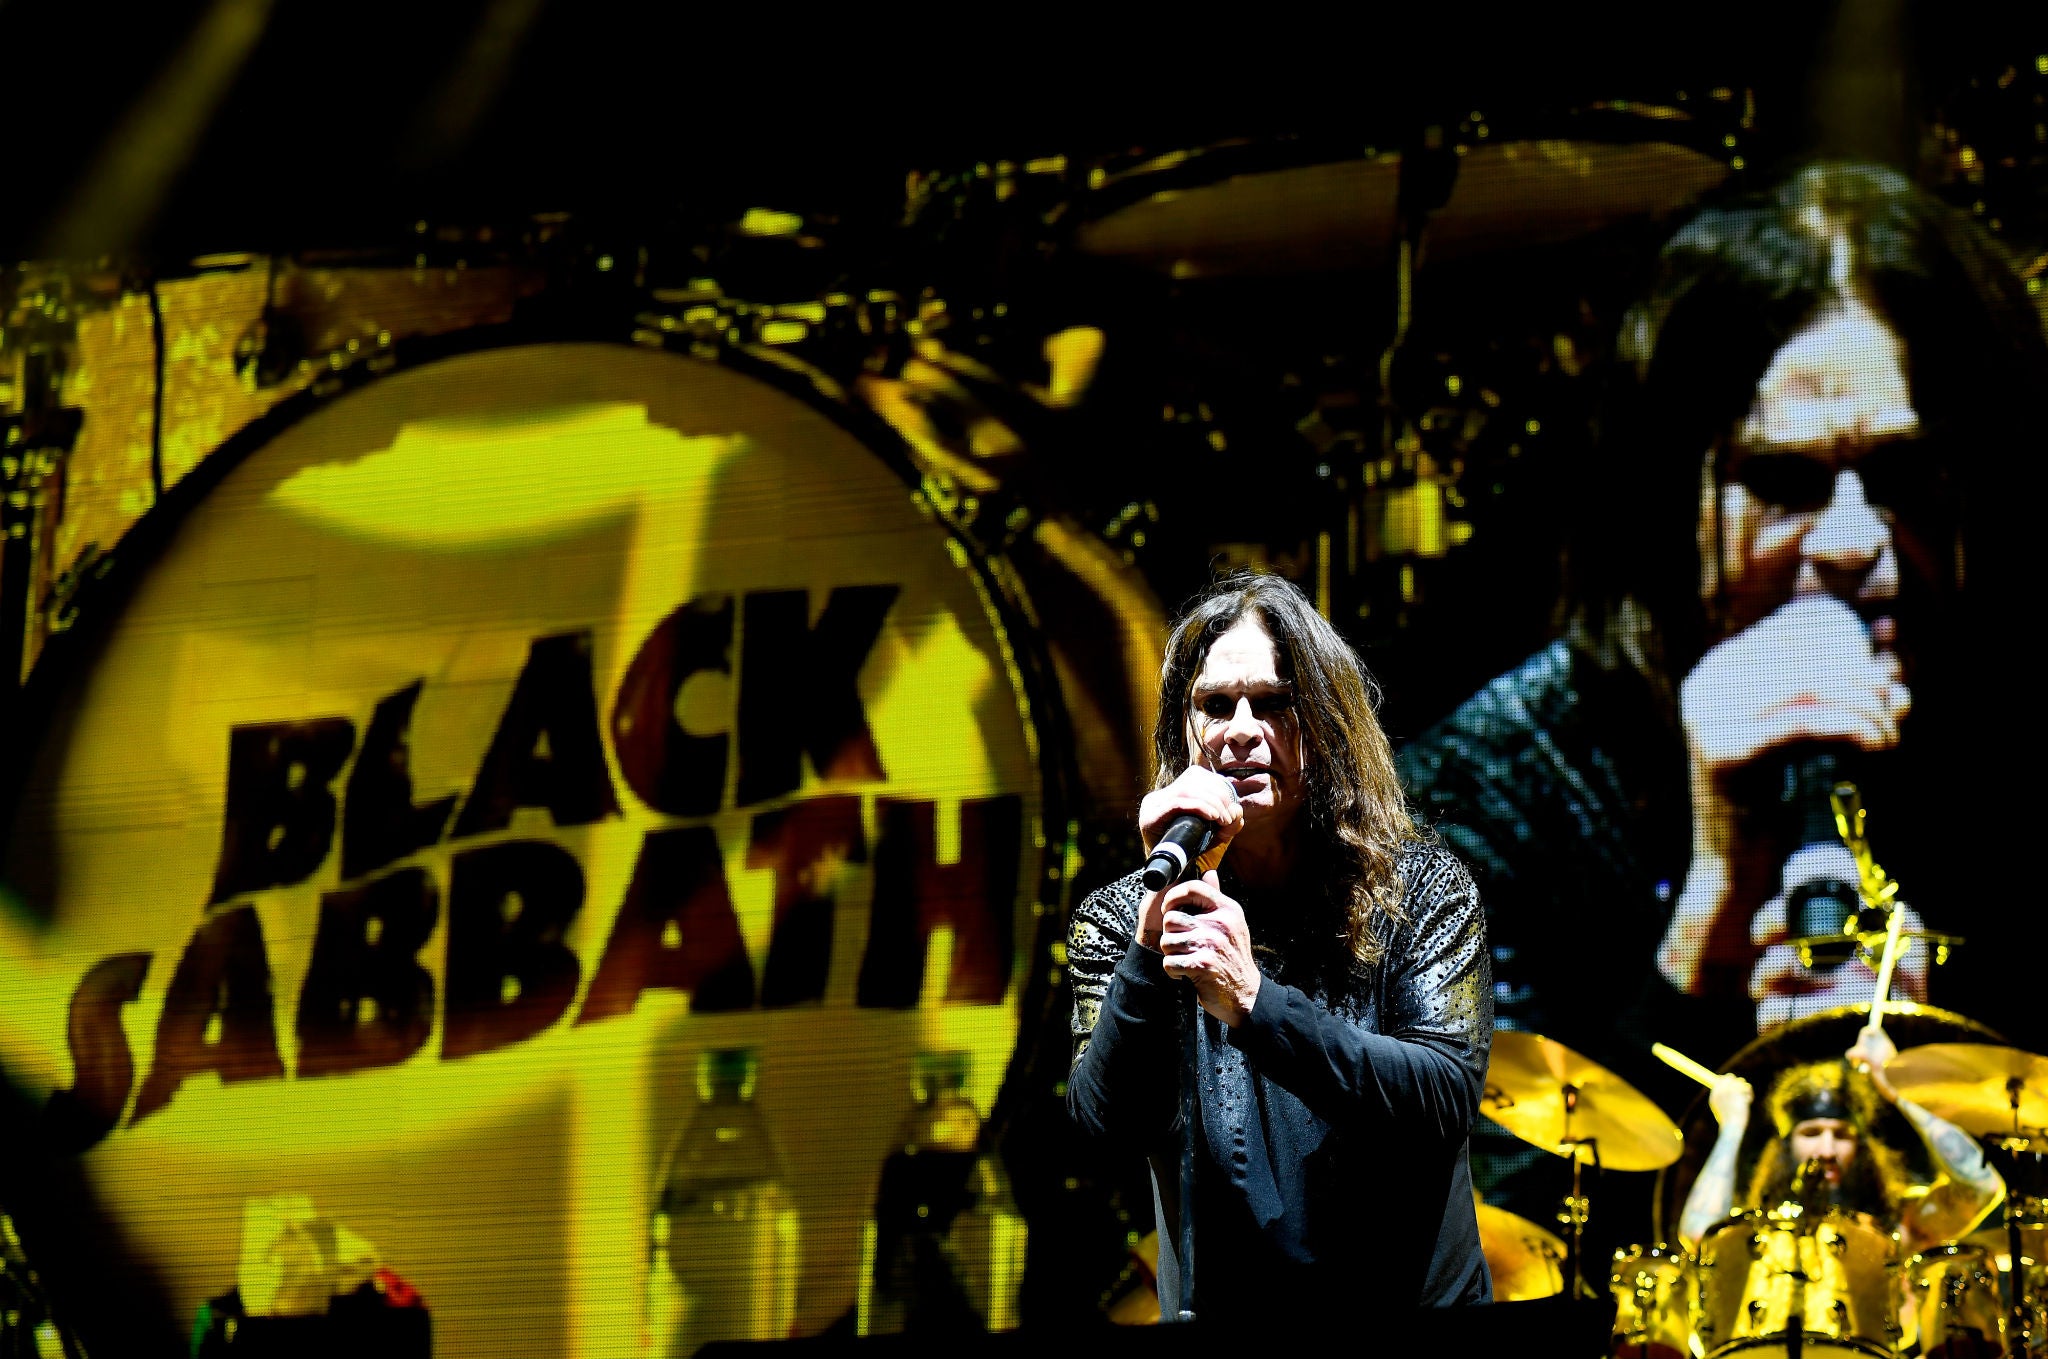 Black Sabbath released their worst record in 1995